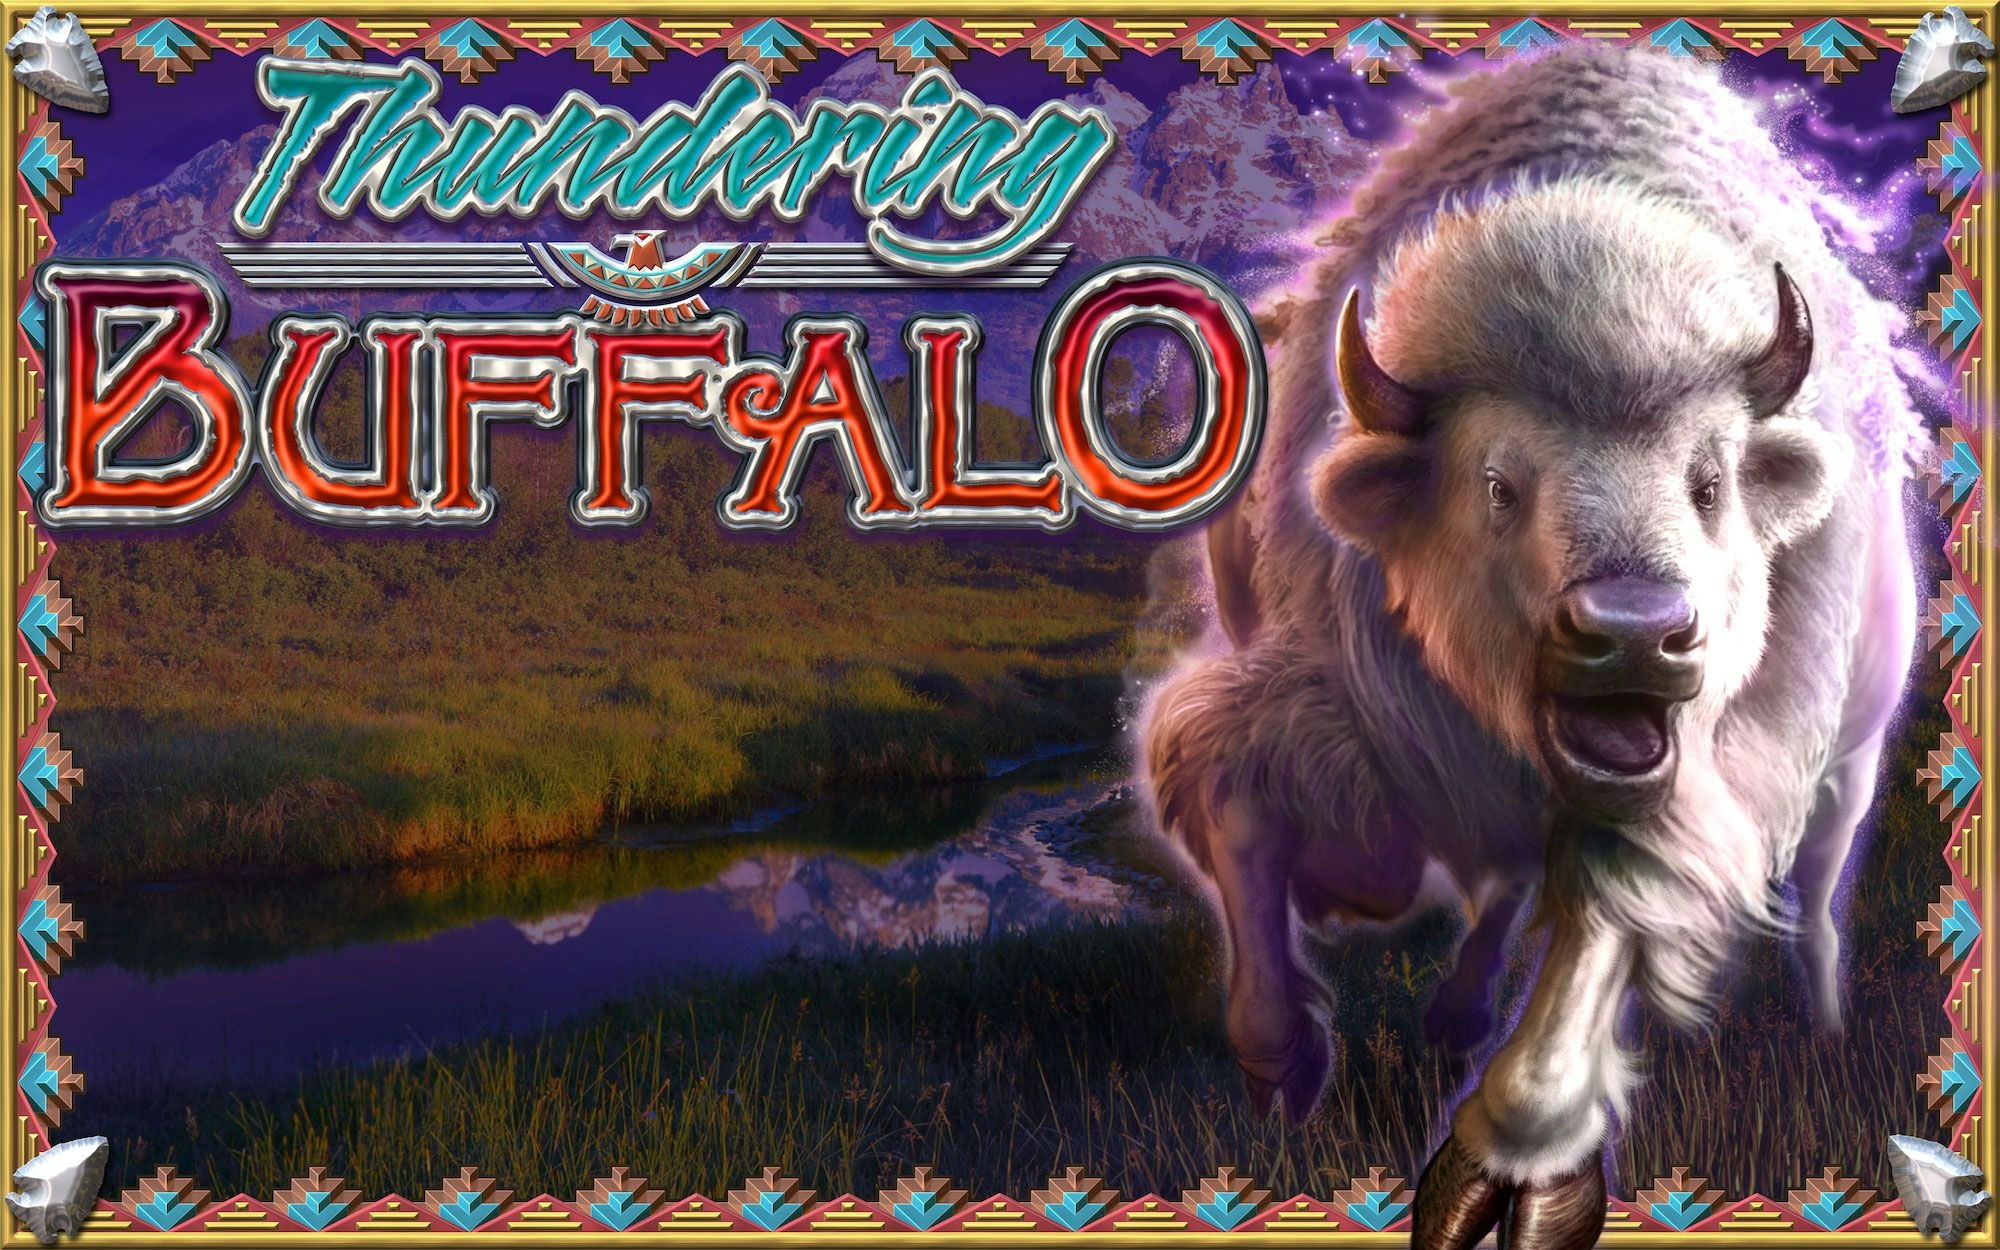 Thundering Buffalo machine review, strategy, and bonus to play online | The TwinSpires Edge